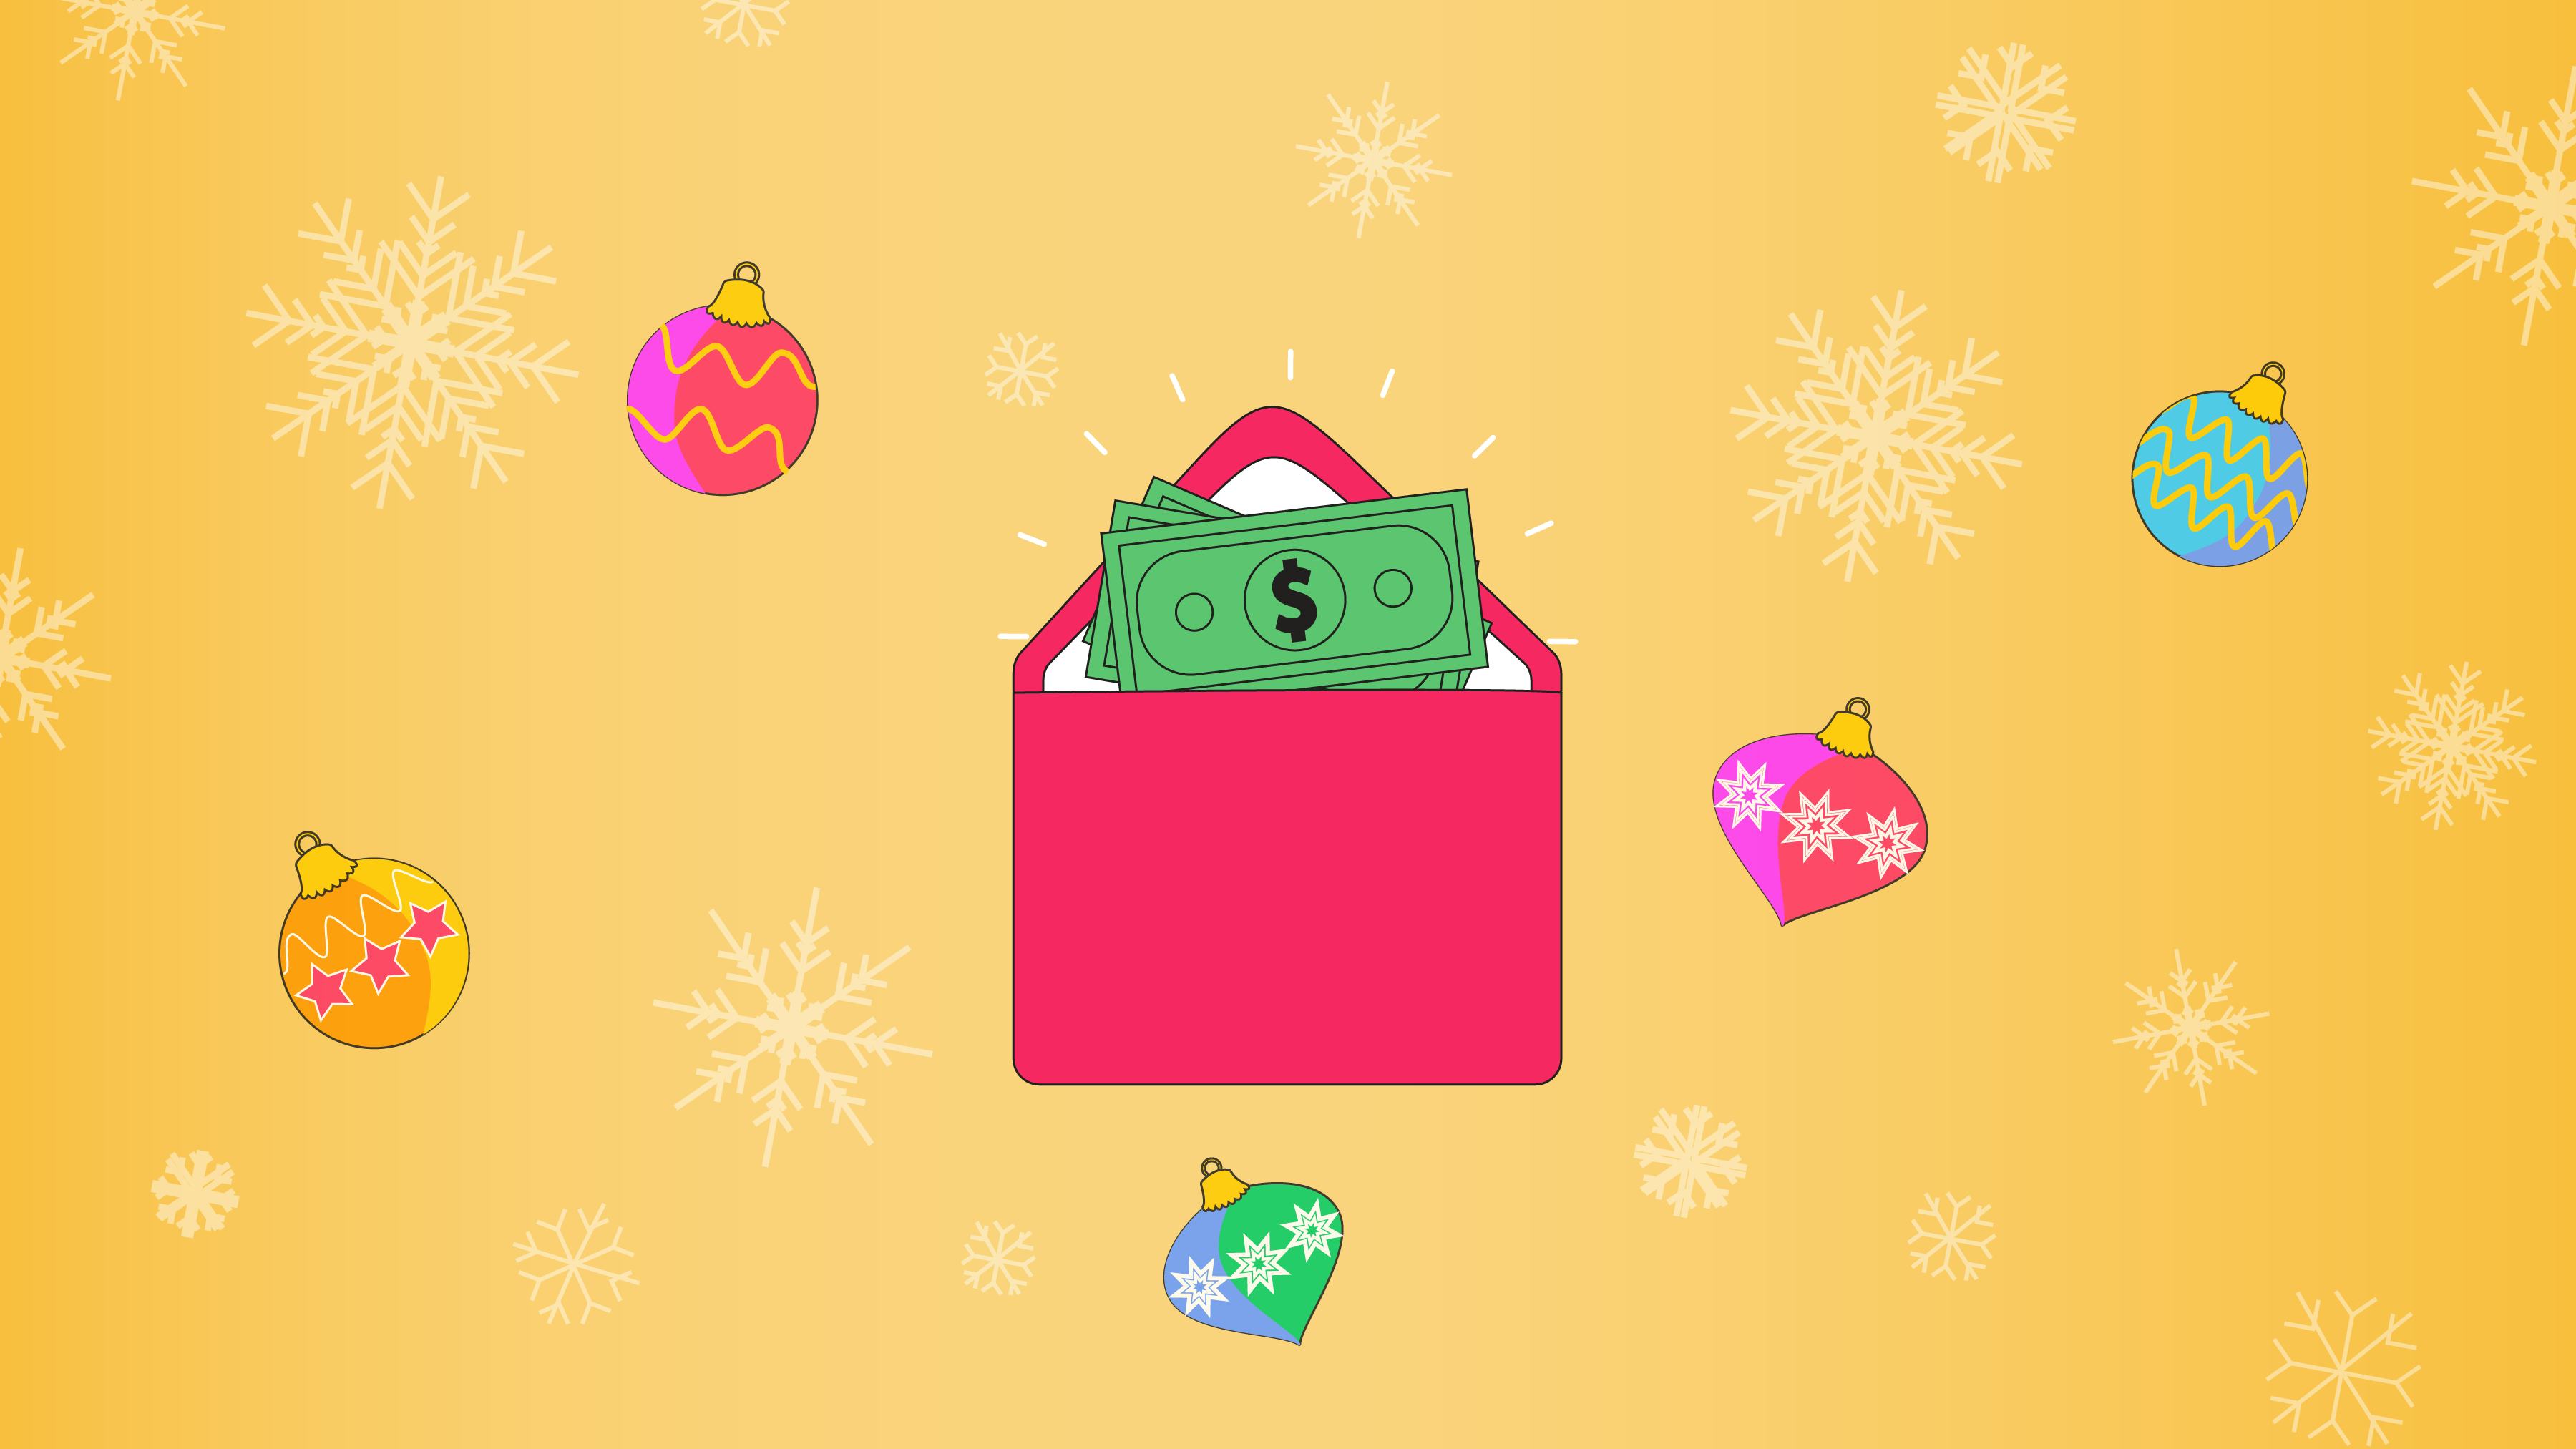 Holiday Pools Are The Festive Way To Give And Receive Cash For Christmas